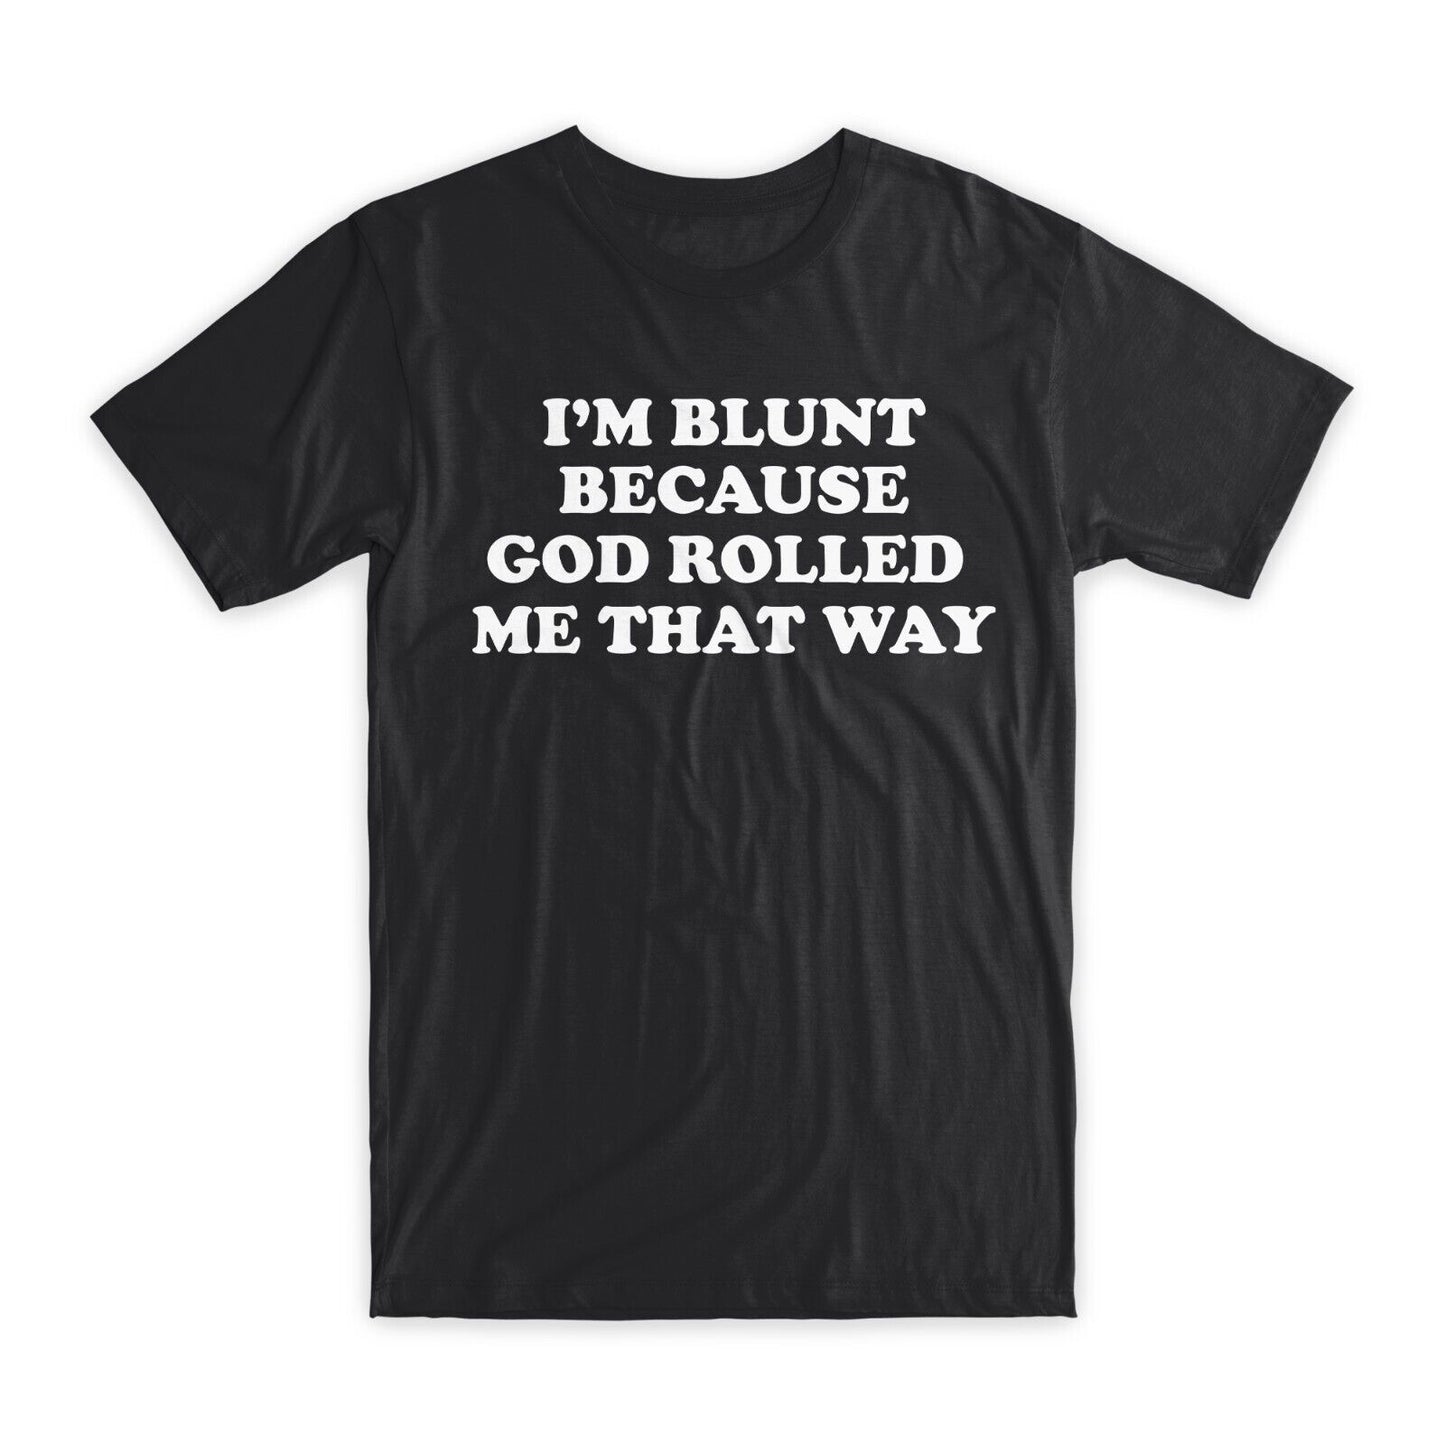 I'm Blunt Because God Rolled Me That Way T-Shirt Premium Cotton Funny T Gift NEW